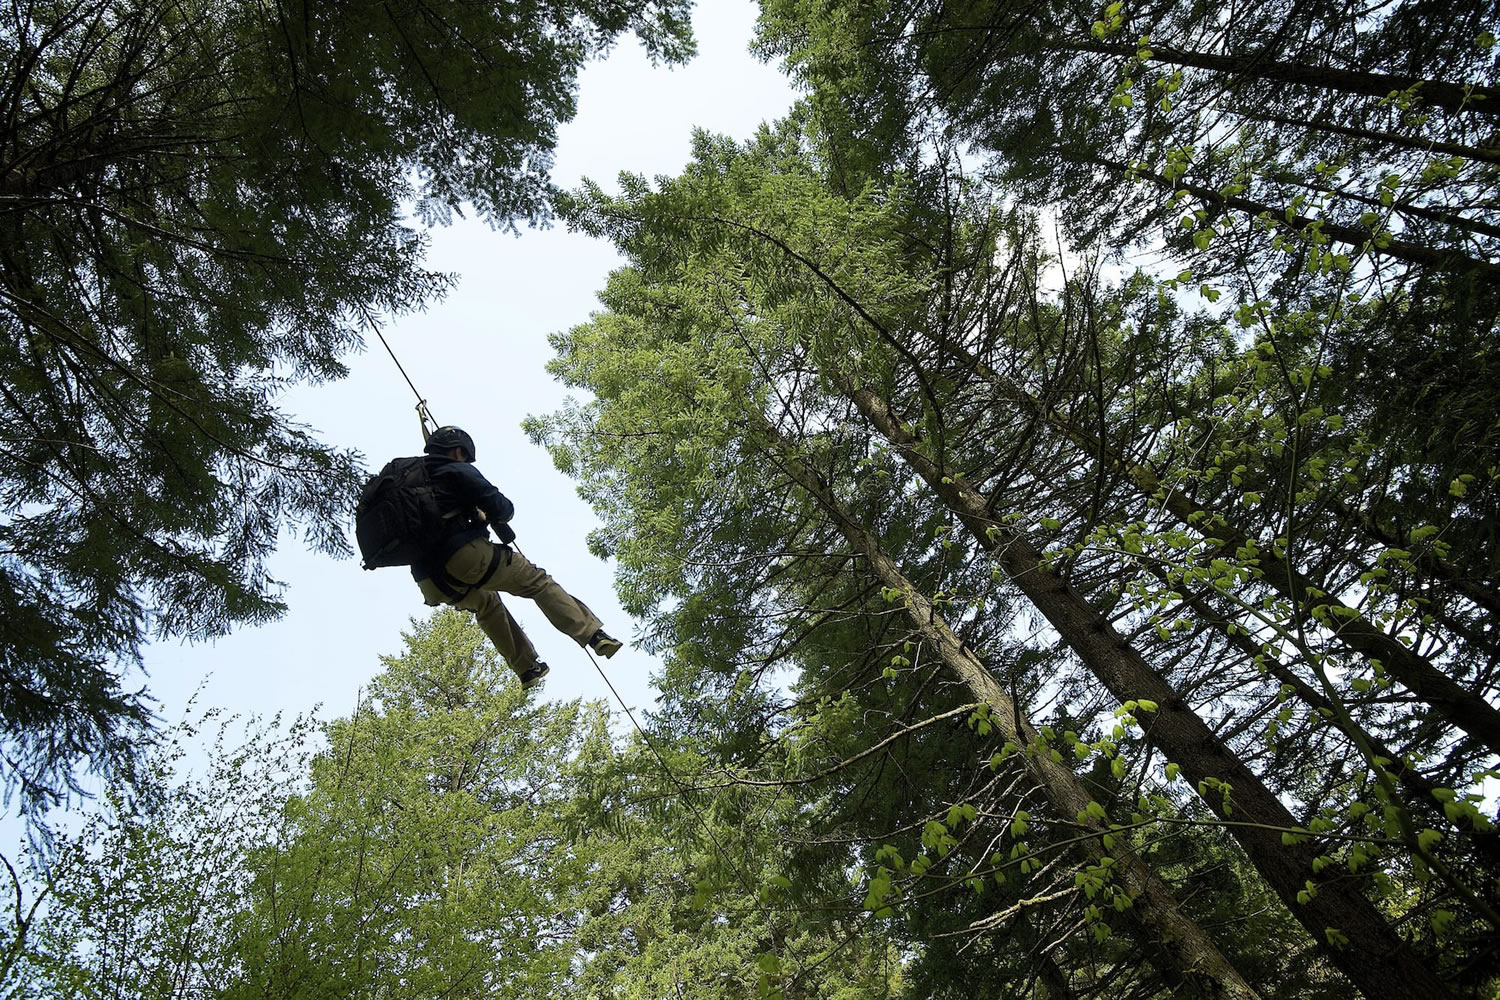 Adam Lapierre, a photographer for Gorge Magazine in Hood River, rides the new zip line under a canopy of 200-foot Douglas firs at Skamania Lodge in Stevenson.